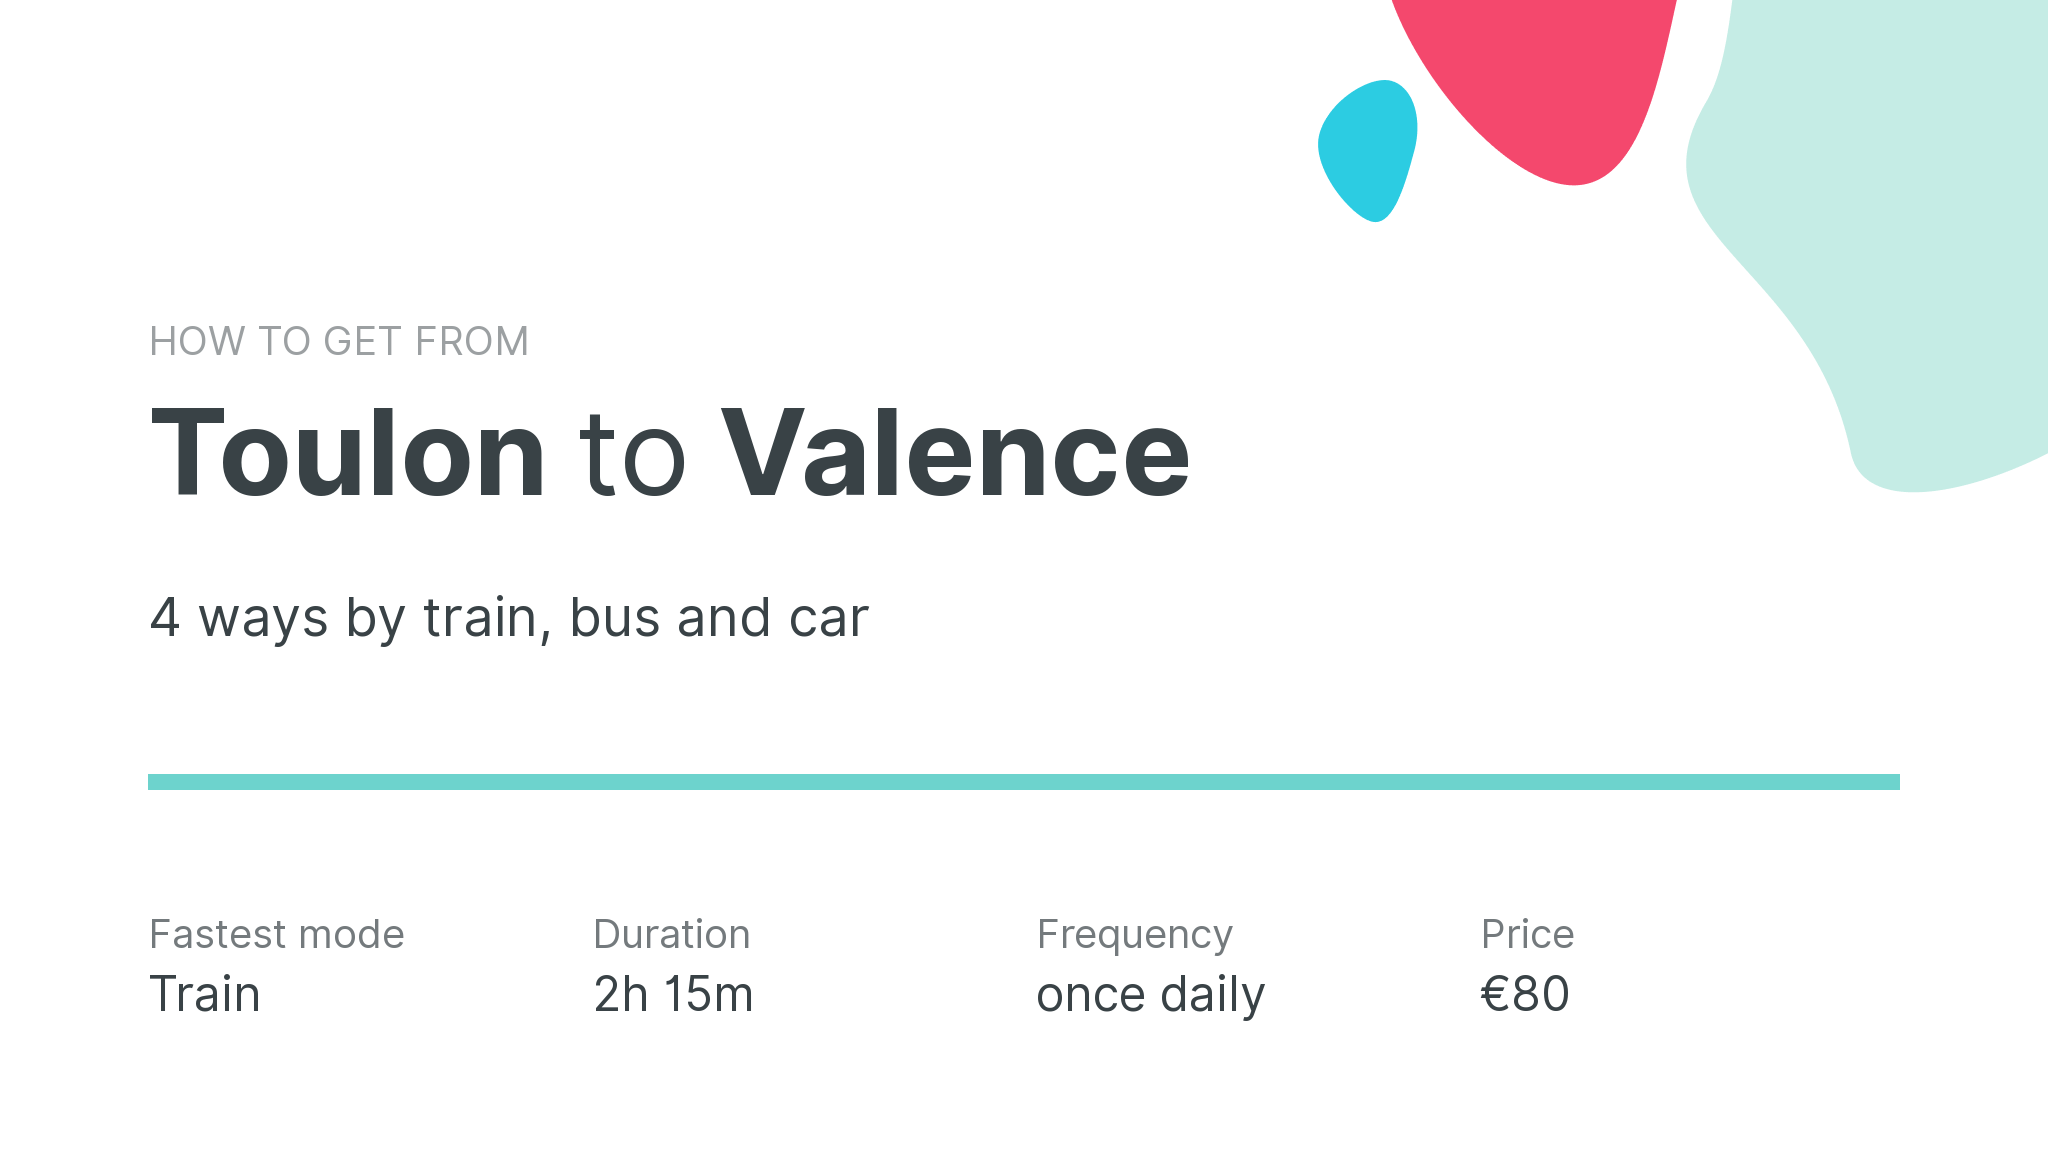 How do I get from Toulon to Valence